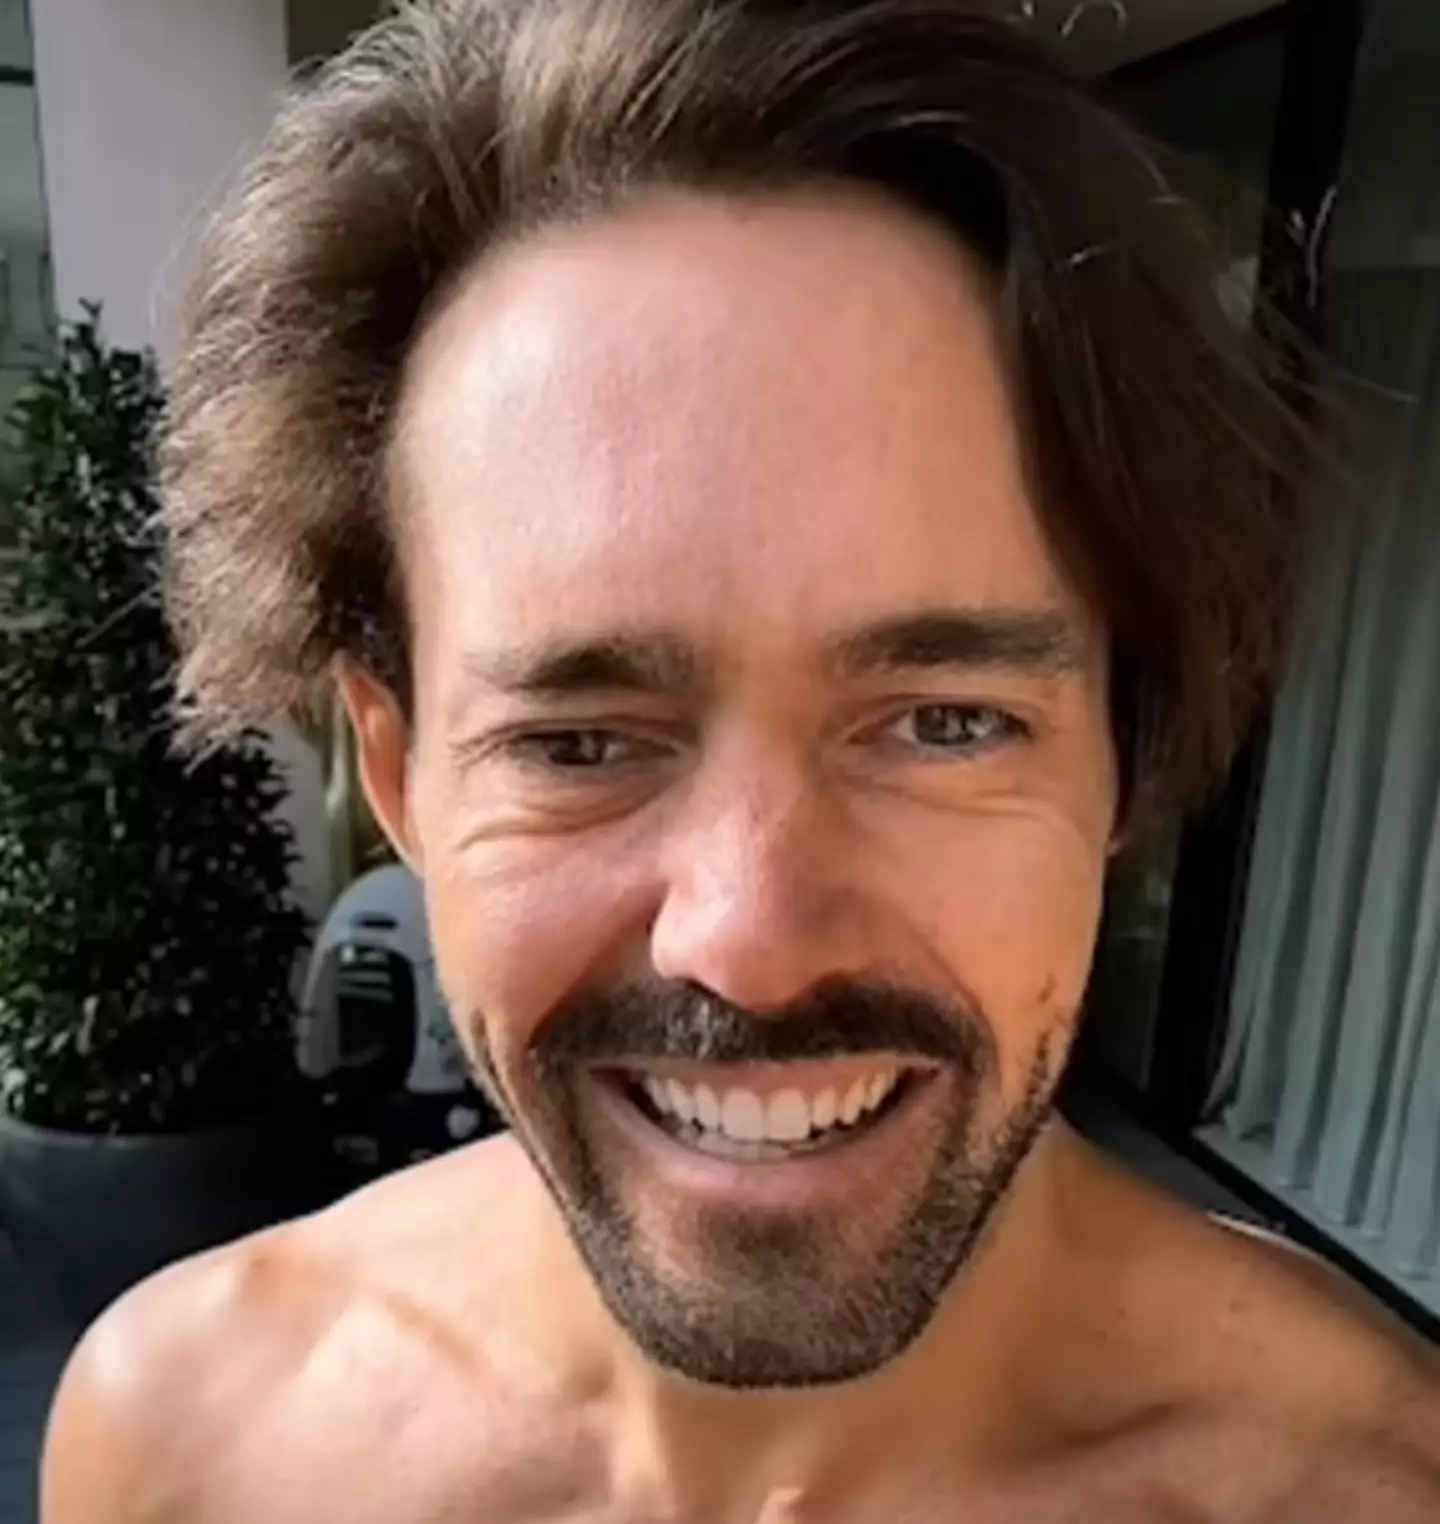 Spencer Matthews has responded to people commenting on his appearance claiming he 'looks sick'.